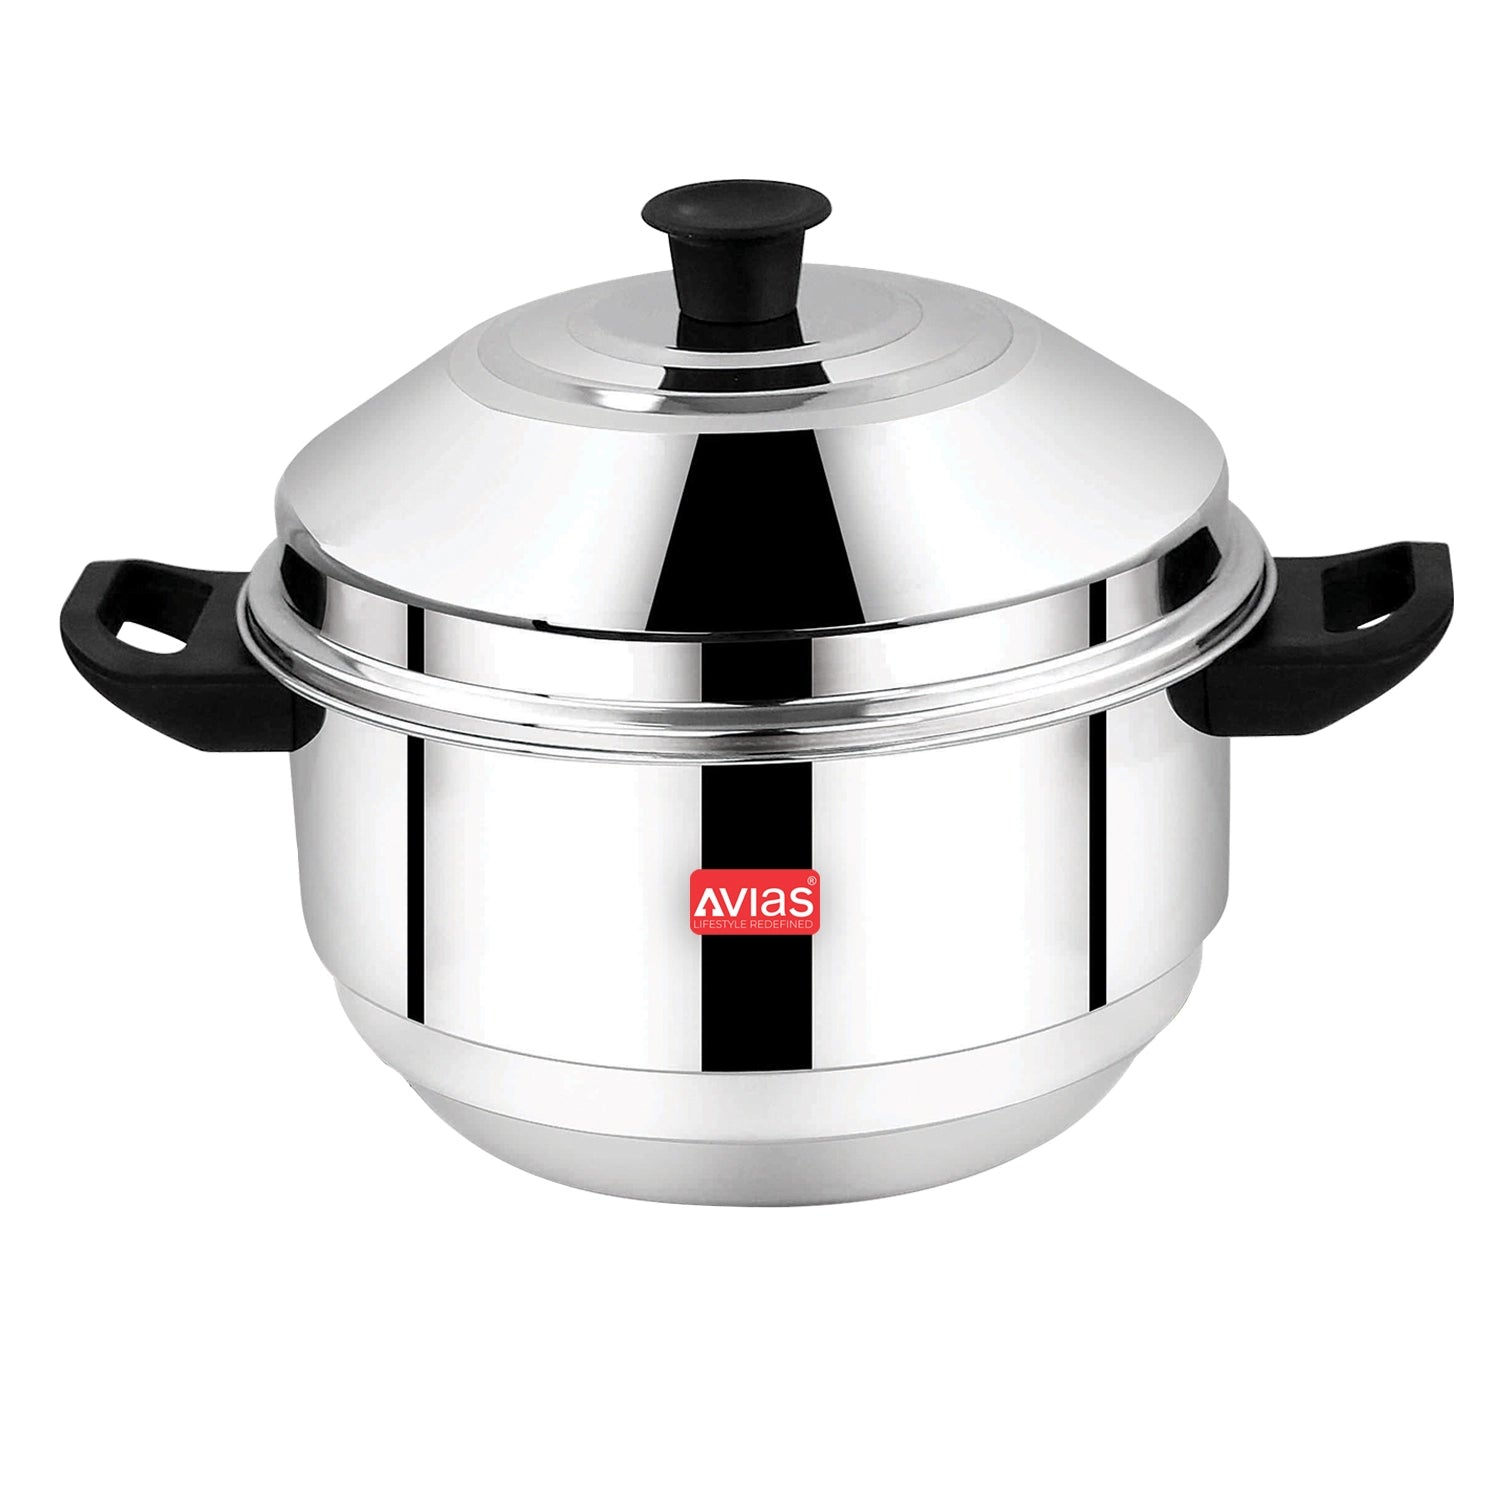 AVIAS Stainless Steel Excello Idly pot/ Cooker/ Maker